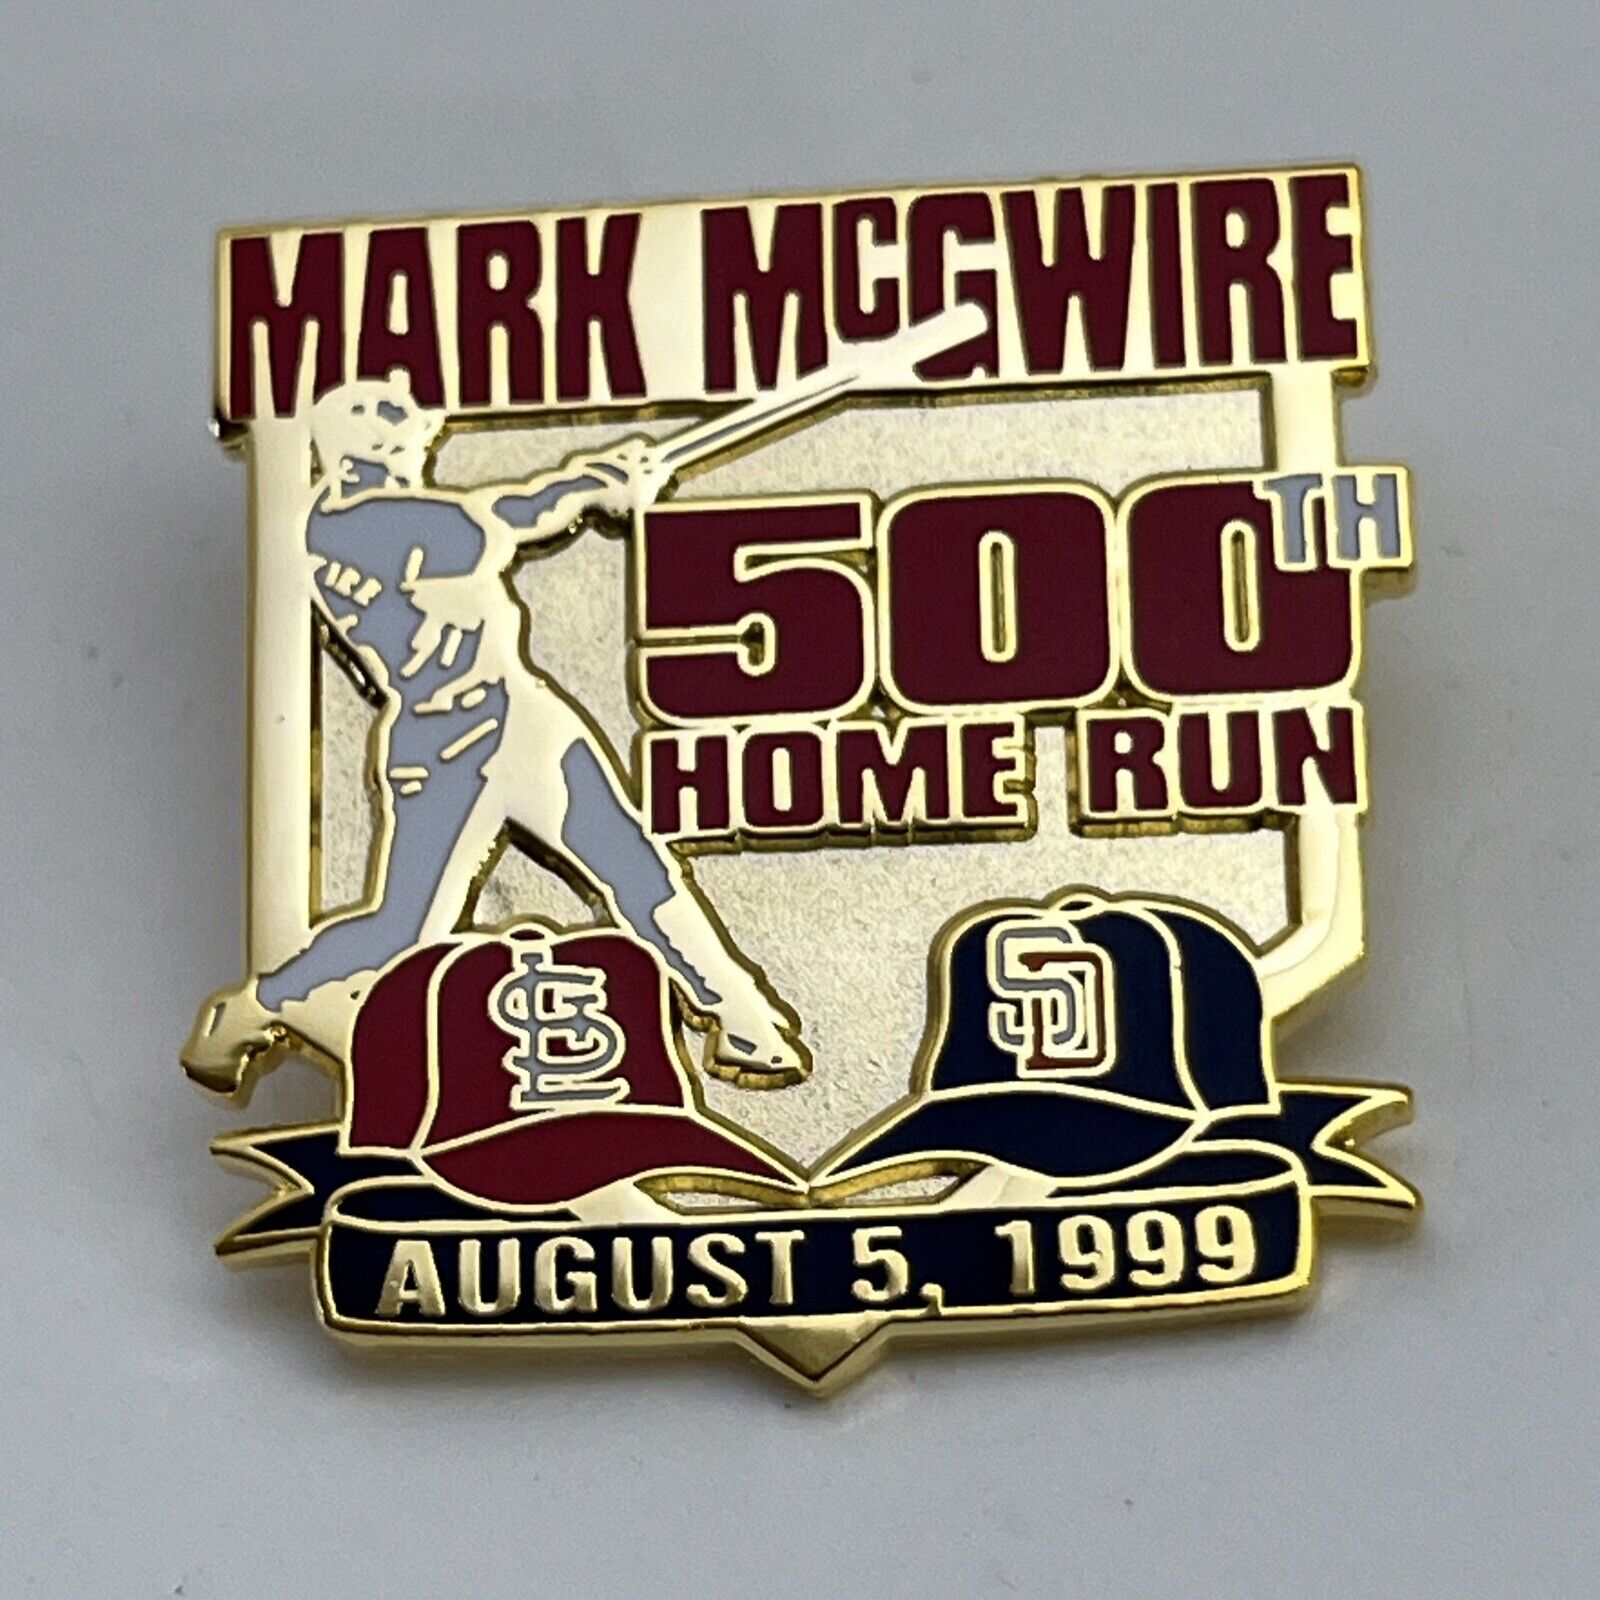 Mark McGwire St. Louis Cardinals 500th Home Run San Diego Padres 1999 Lapel Pin